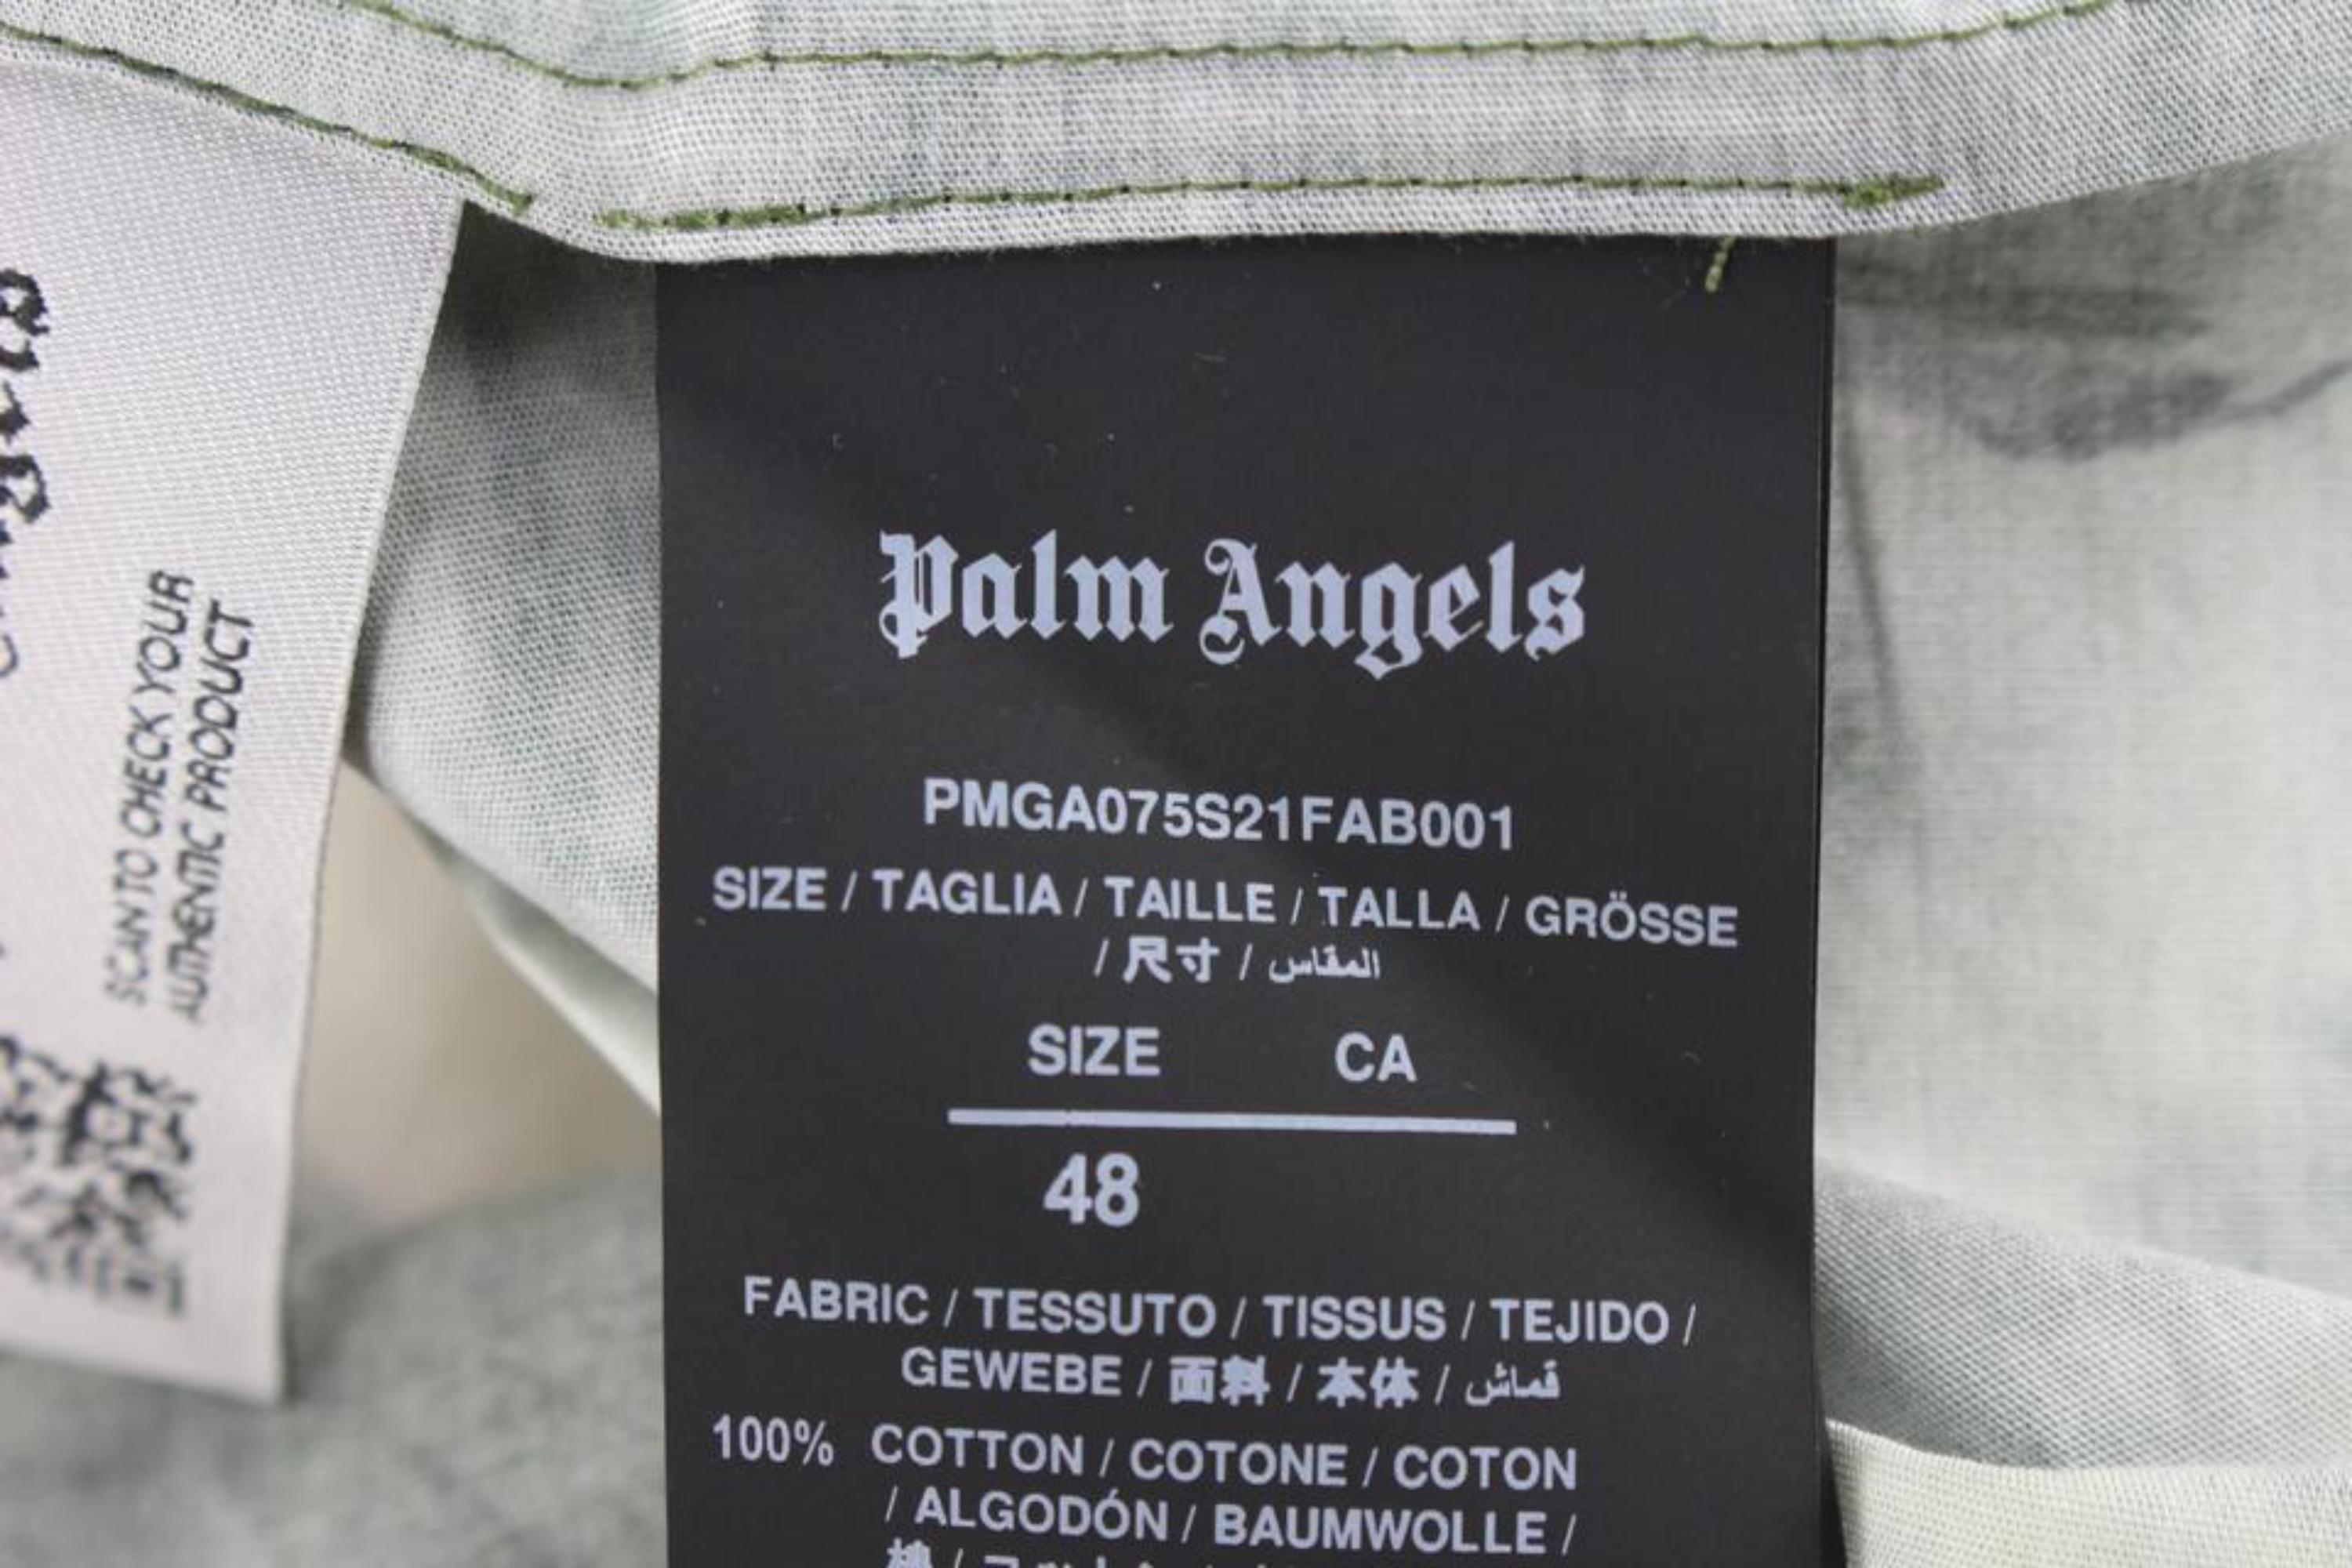 Palm Angels Men's XXXL Size 48 Paradise Heart Button Down Shirt  76pa78s In New Condition For Sale In Dix hills, NY